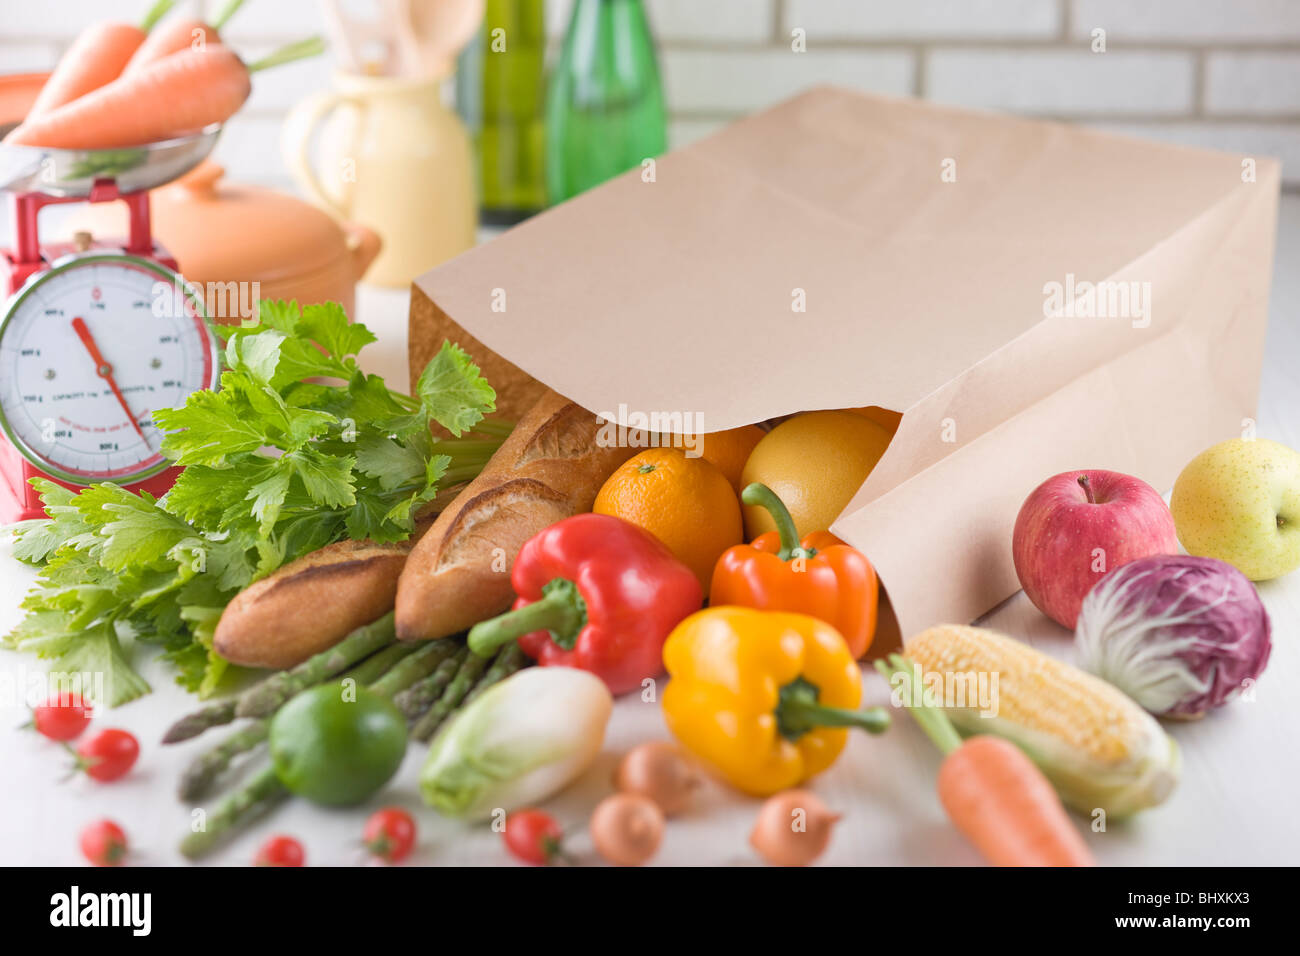 Grocery and Paper bag Stock Photo